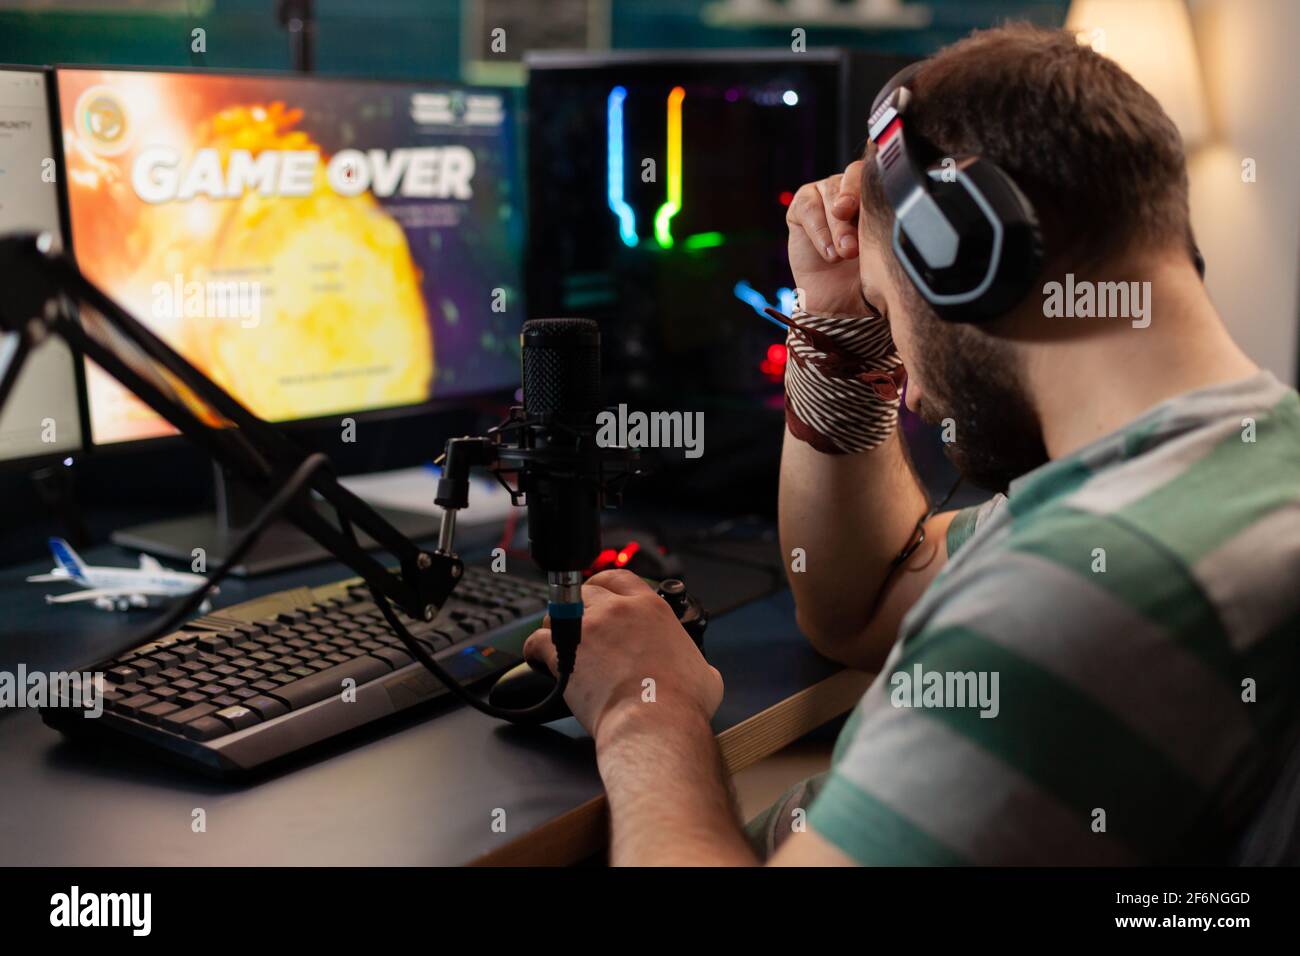 Videogame streamer losing videogame competition while wearing professional headset. Defeated gamer using modern controller for online tournament late at night in gaming room Stock Photo